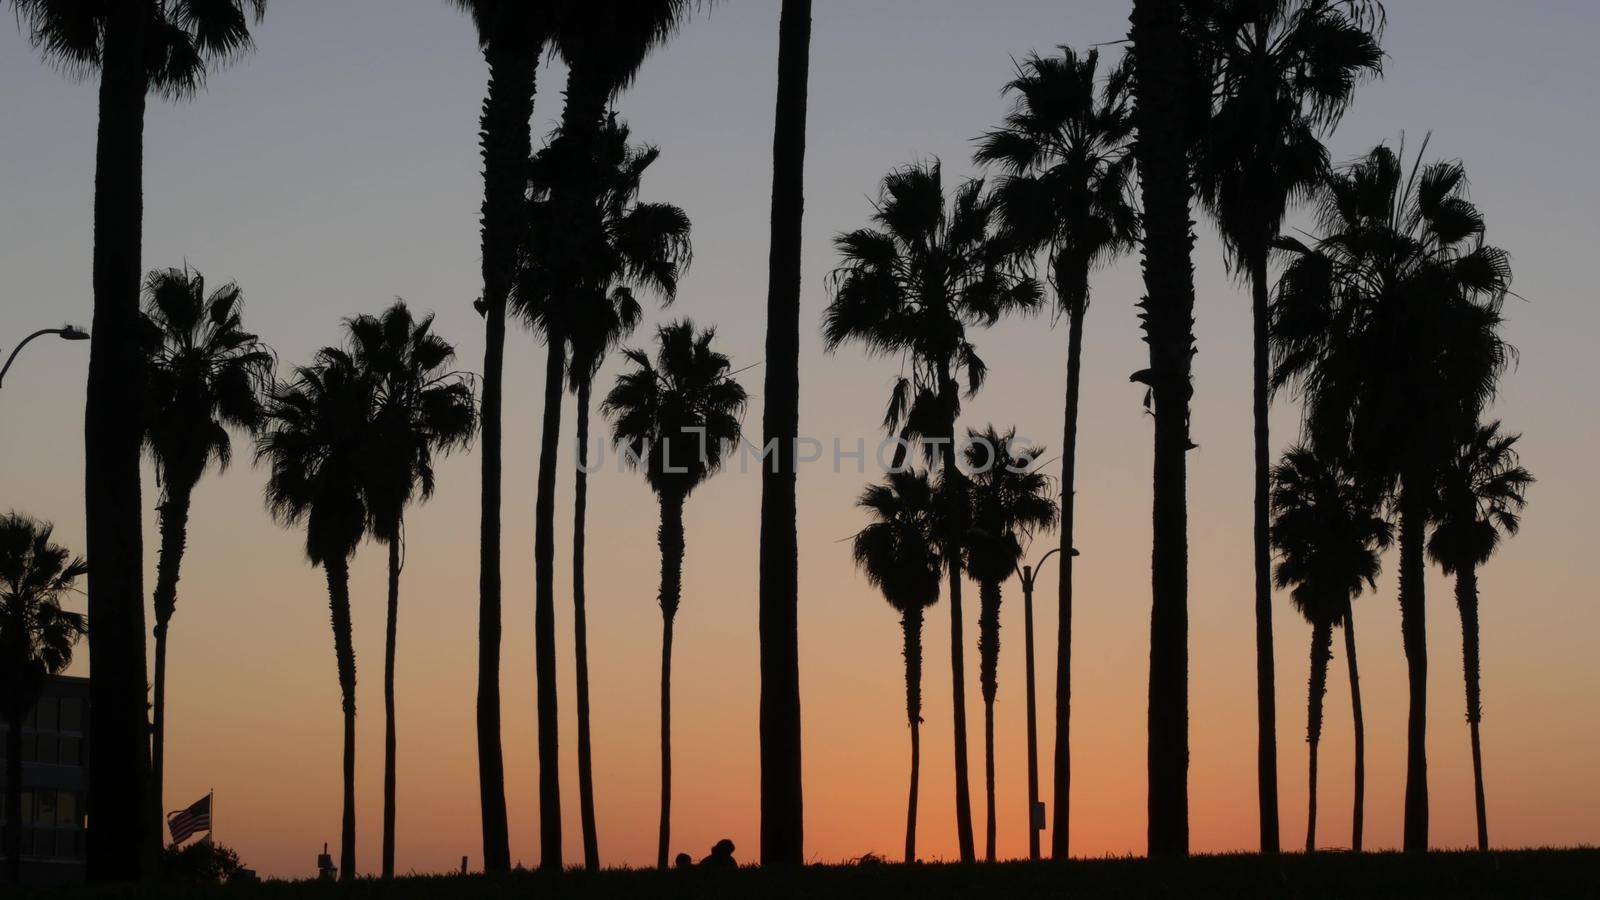 Silhouettes palm trees and people walk on beach at sunset, California coast, USA by DogoraSun